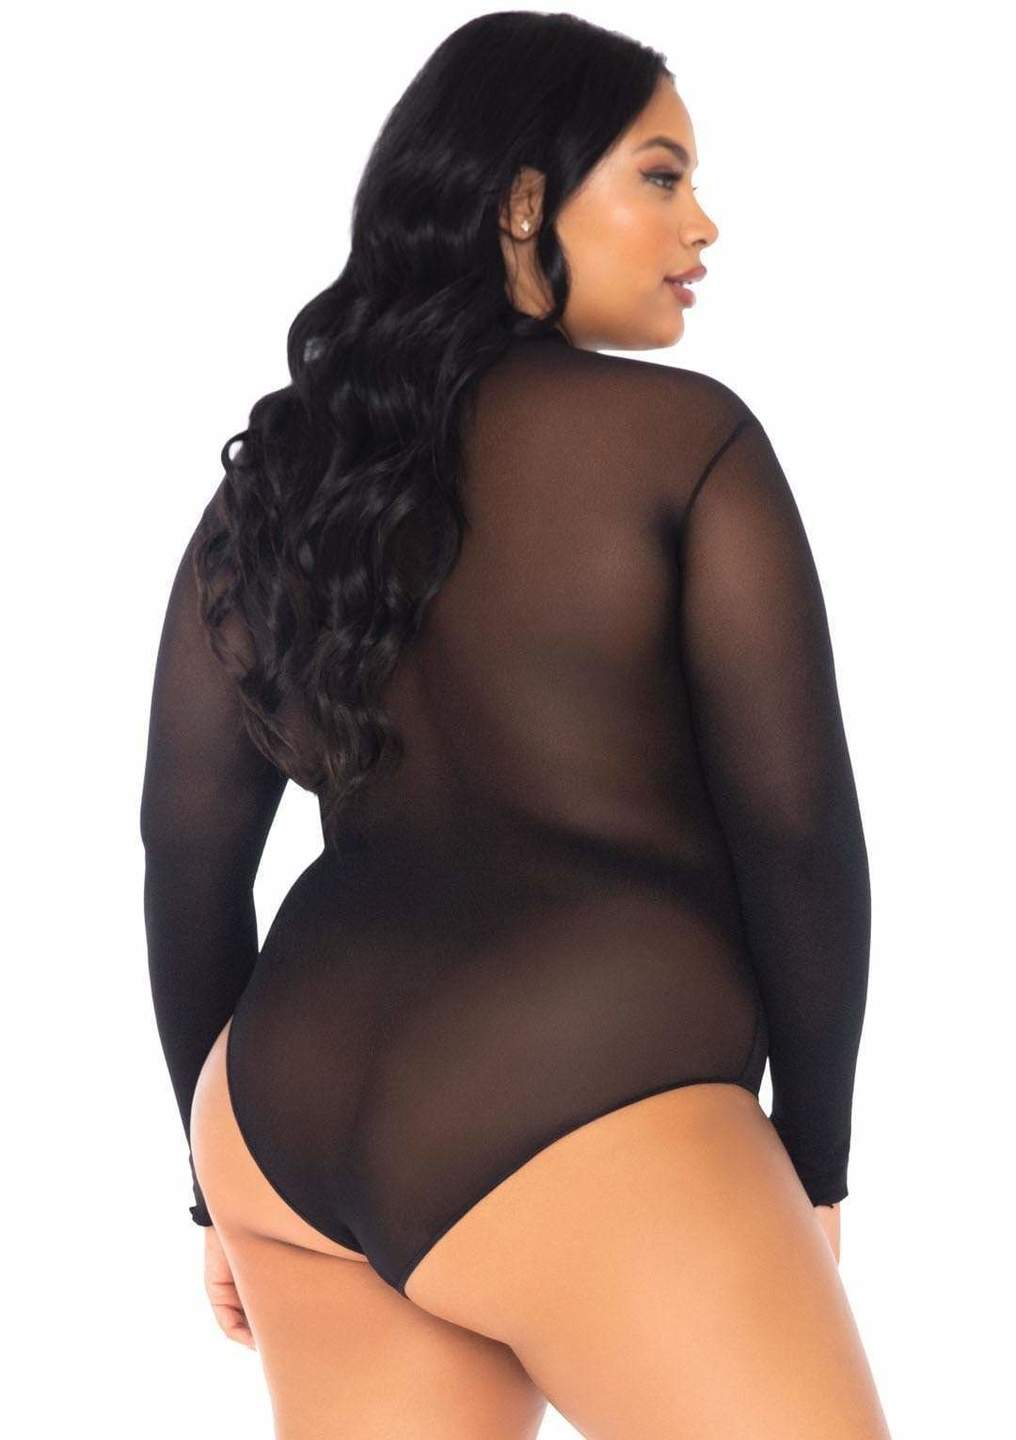 A model wearing the plus size Opaque High Neck Long Sleeve Bodysuit, rear view.